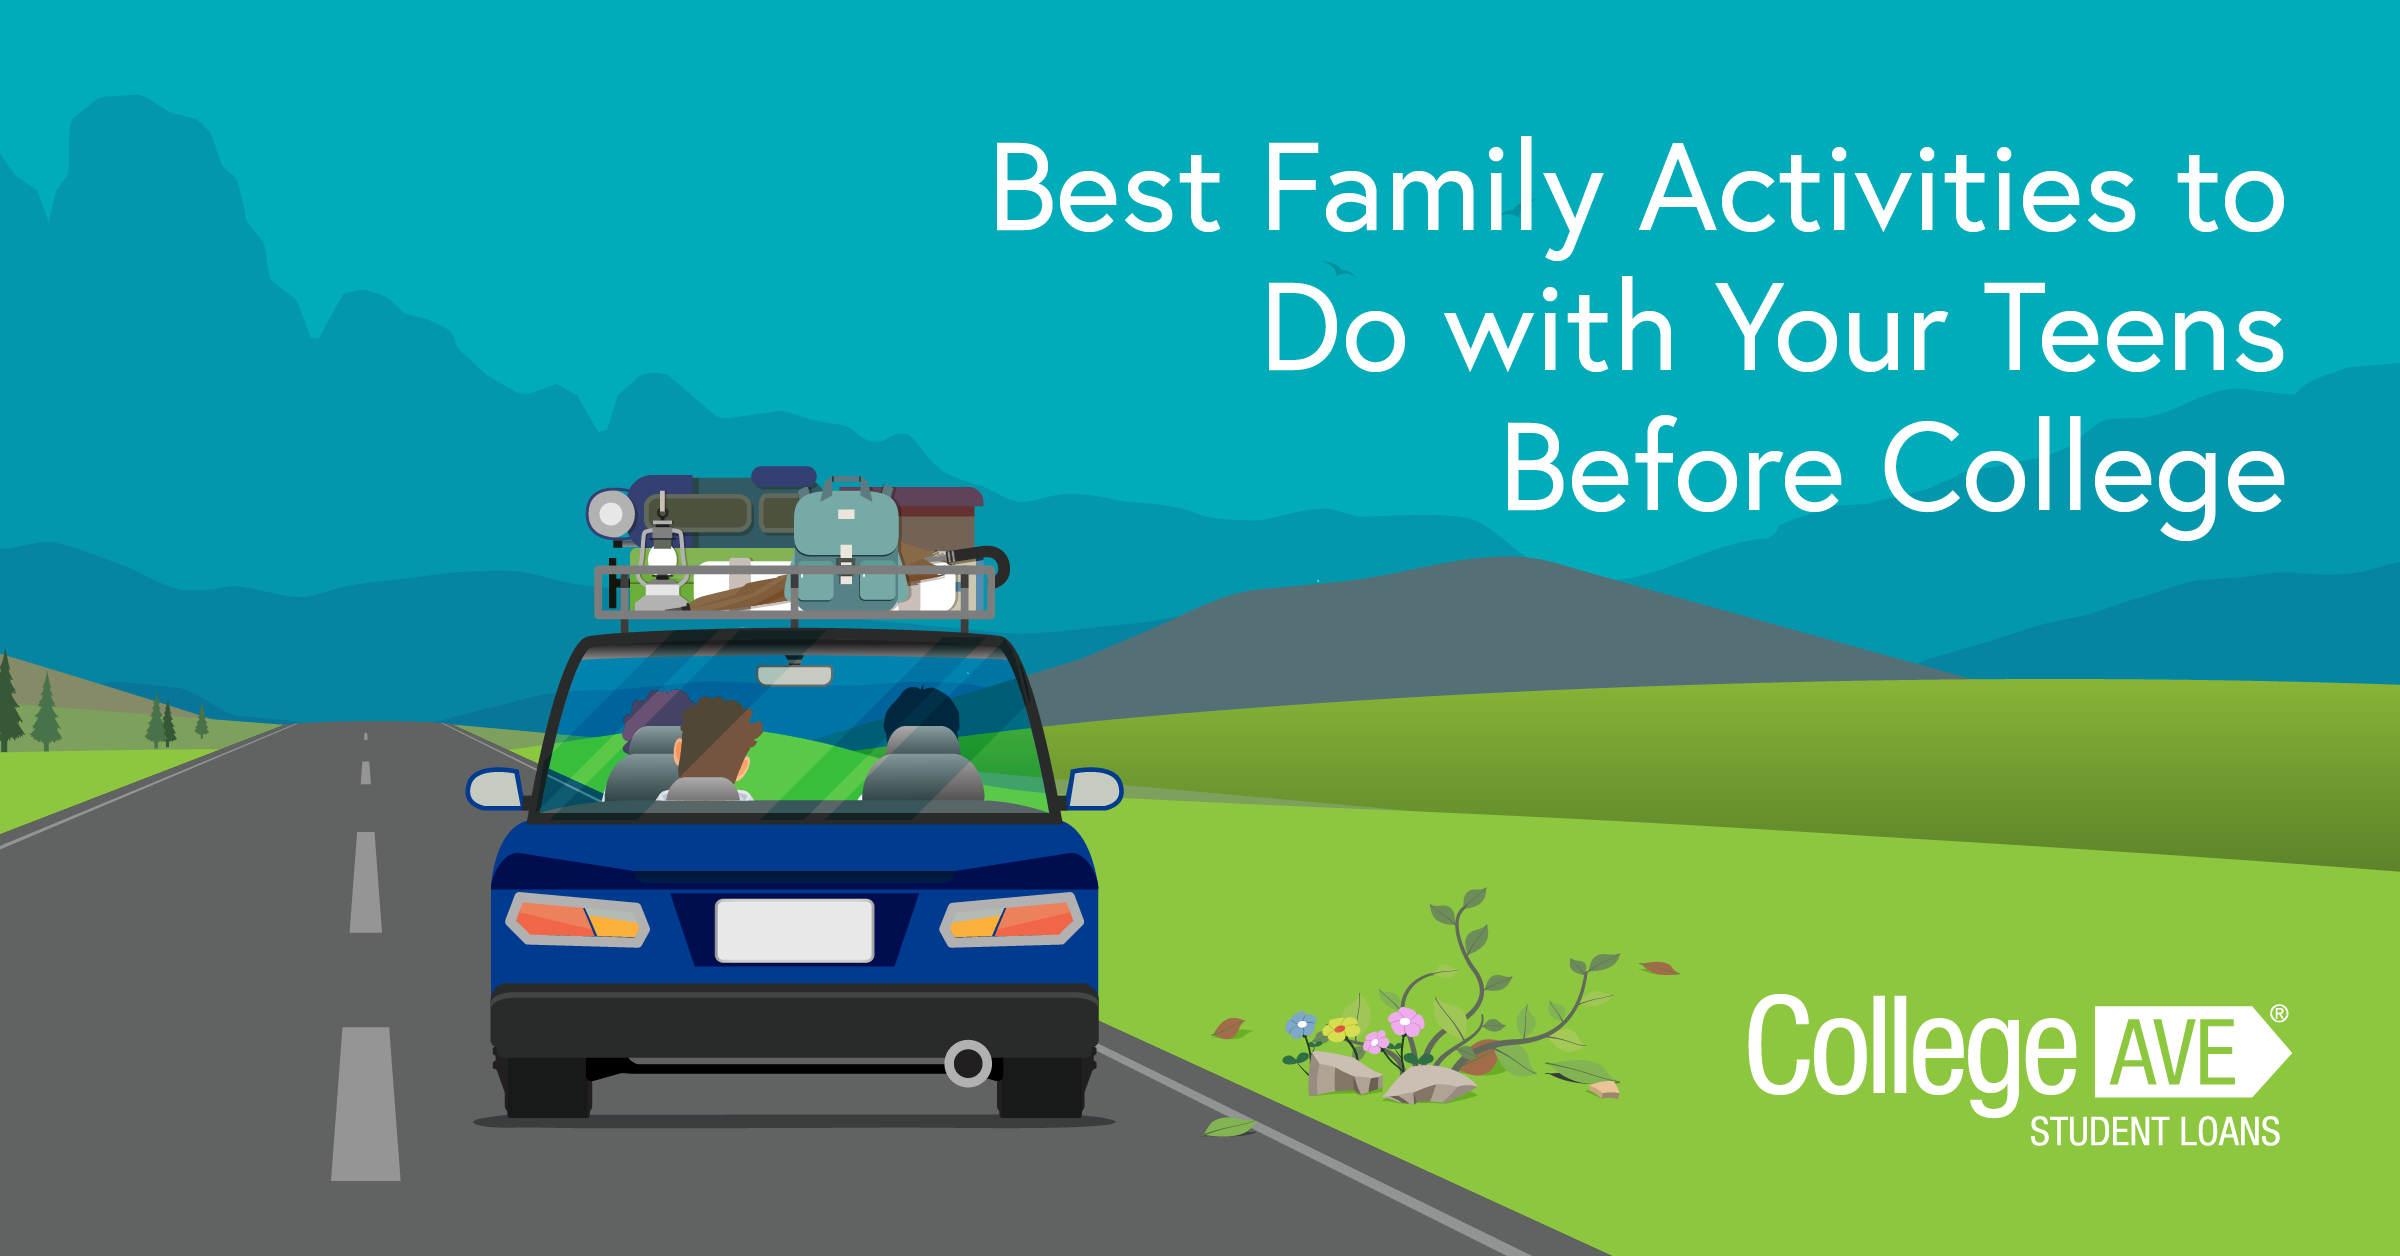 Best Family Activities to Do With Your Teens Before College